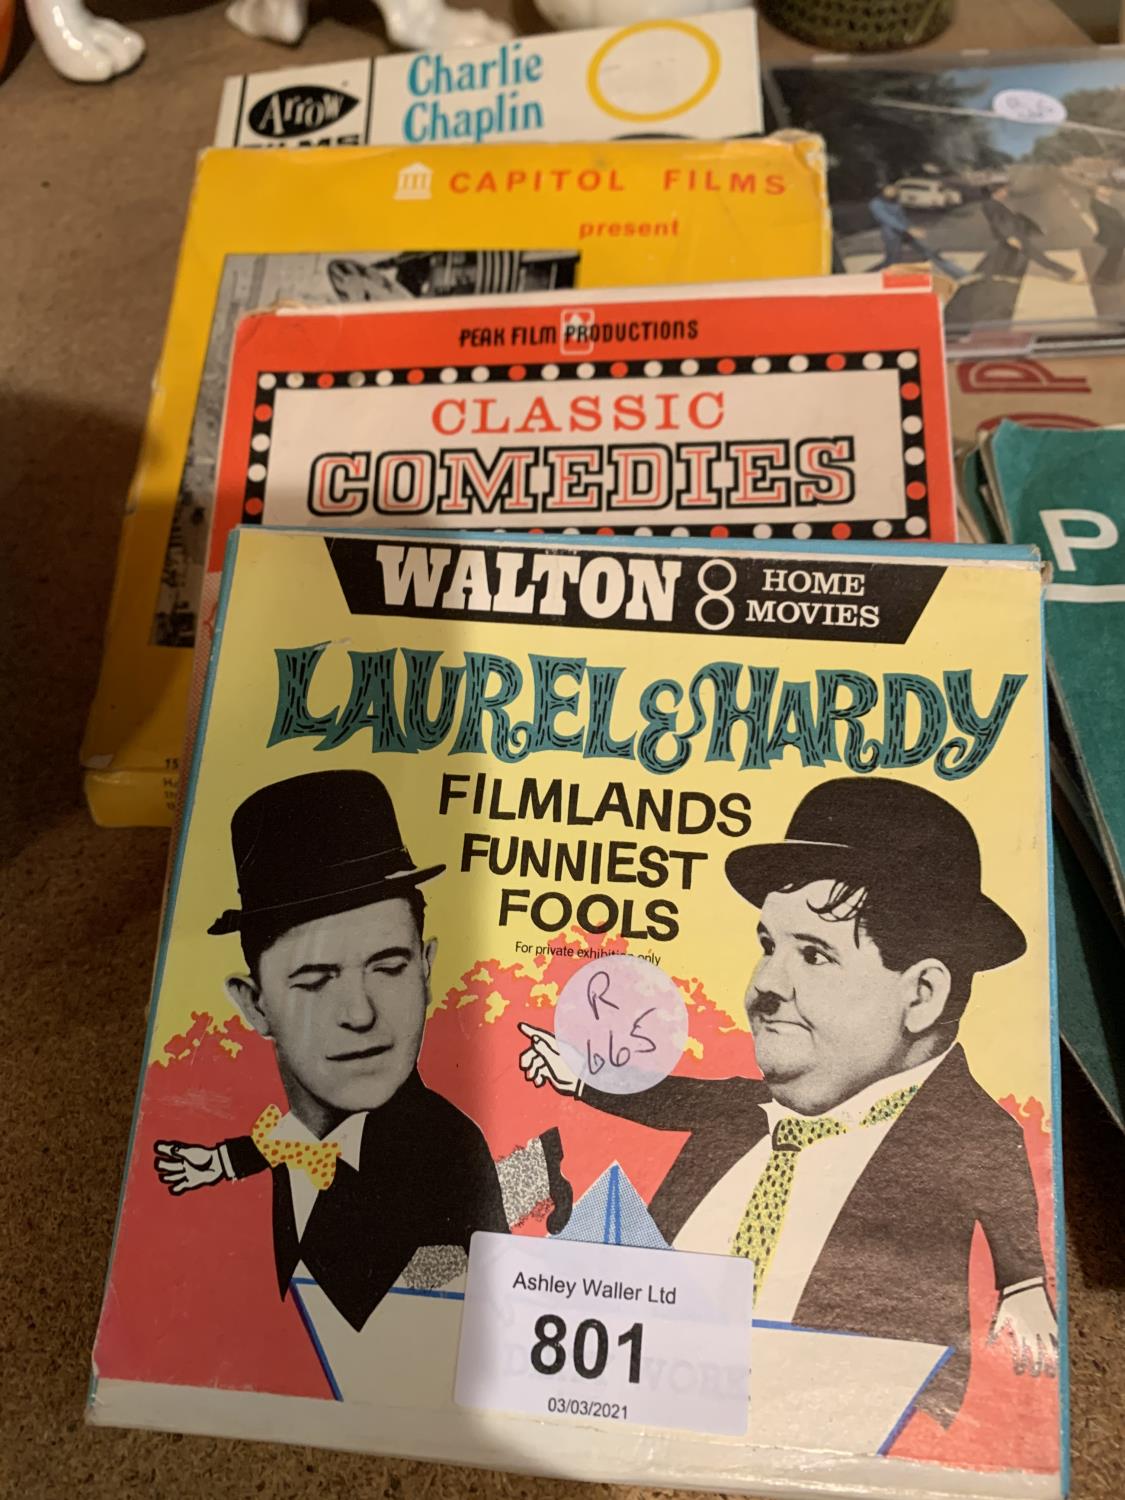 A QUANTITY OF BEATLES SINGLES, ELVIS 78'S AND 8 MM FILMS TO INCLUDE LAUREL AND HARDY - Image 3 of 3